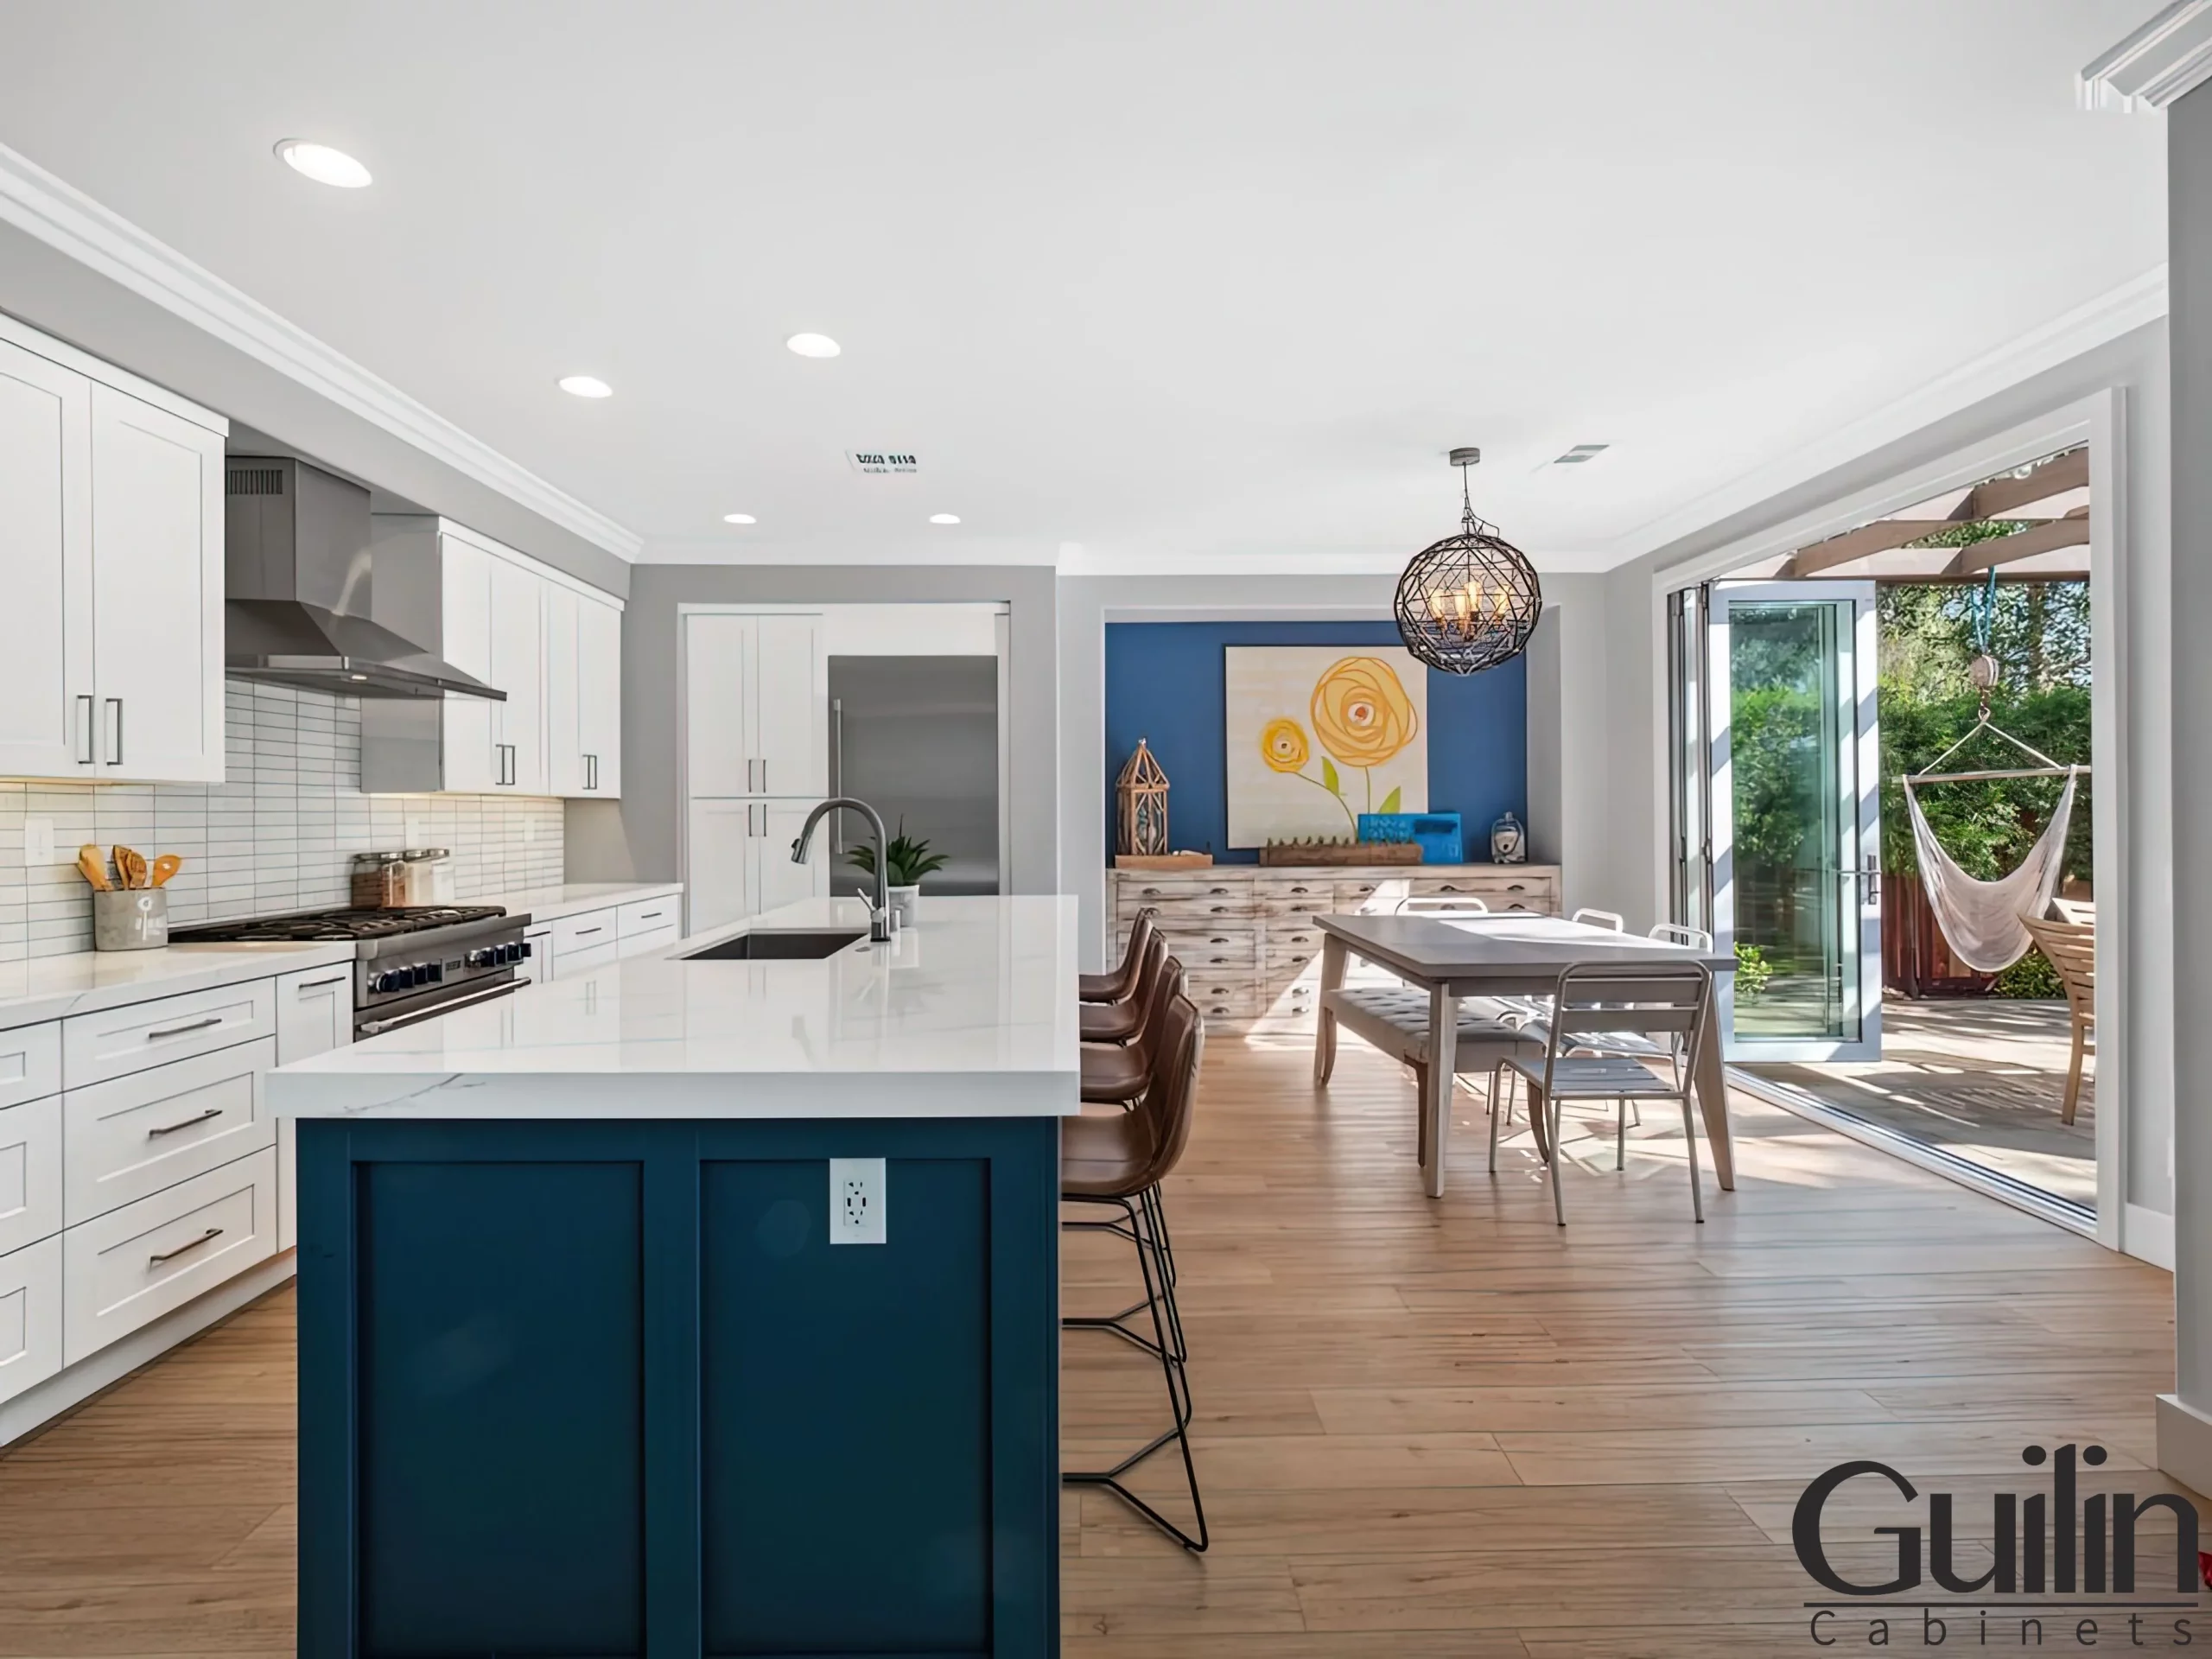 taking advantage of large windows and strategically placed lighting fixtures, your kitchen will be flooded with natural fresh air and natural light,